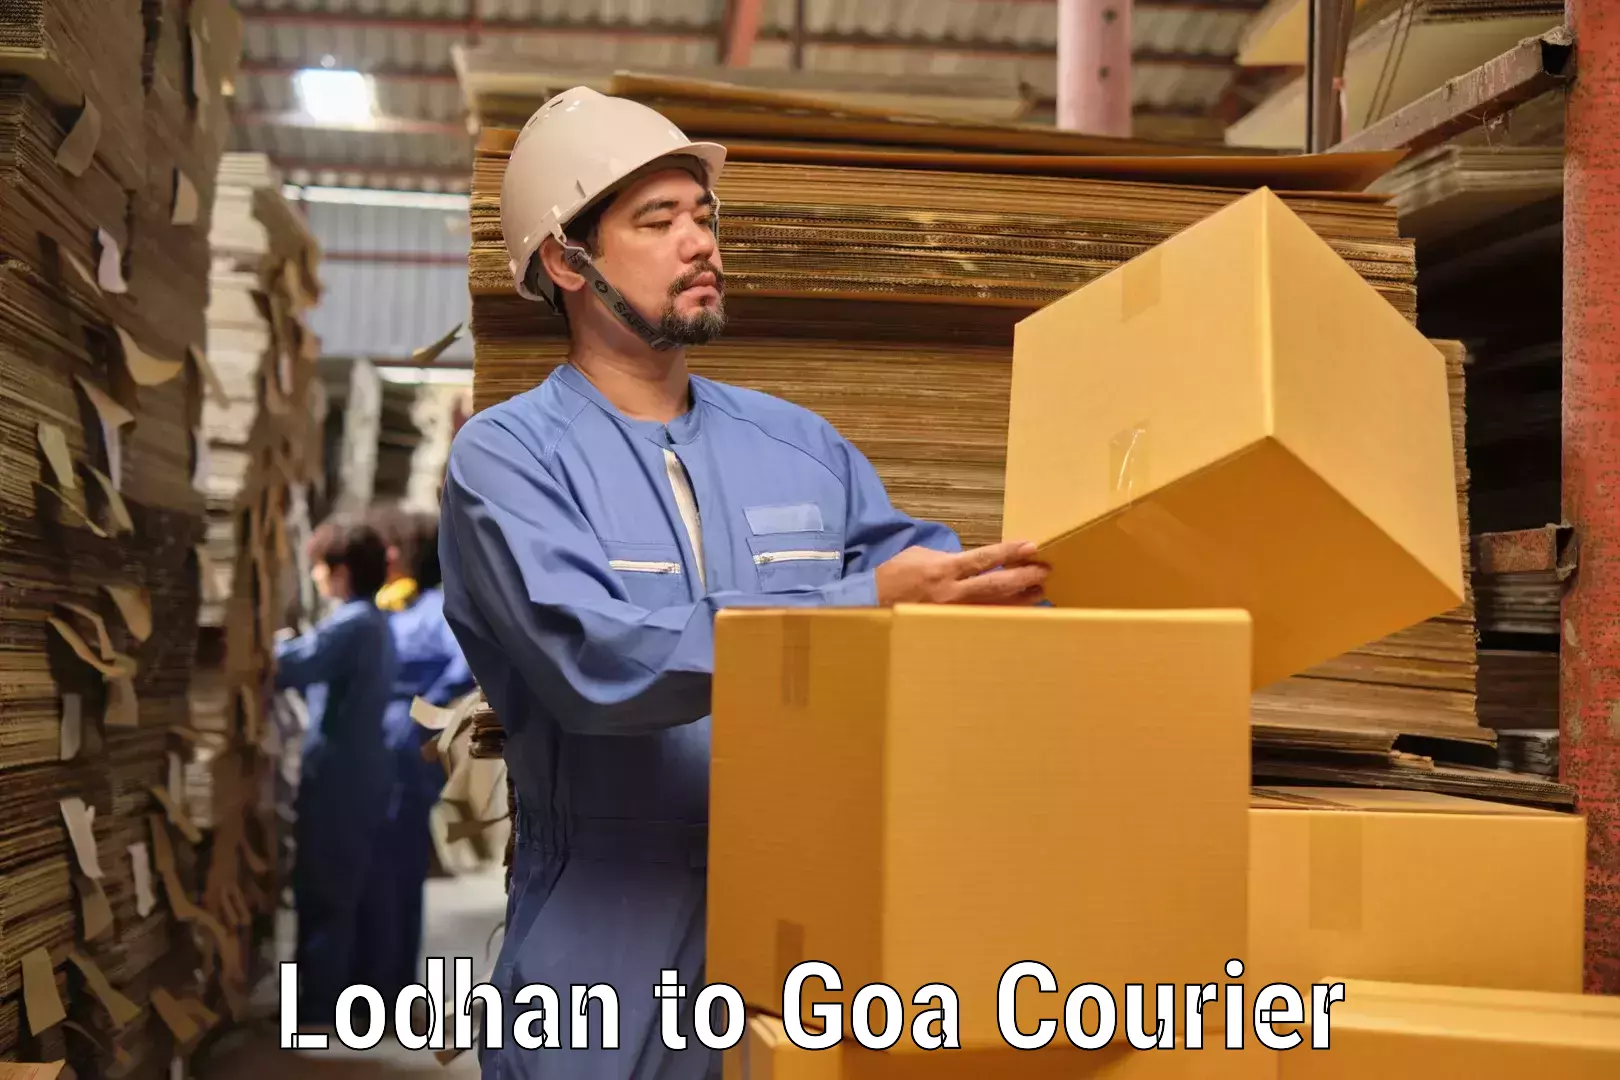 Courier service innovation Lodhan to Panaji